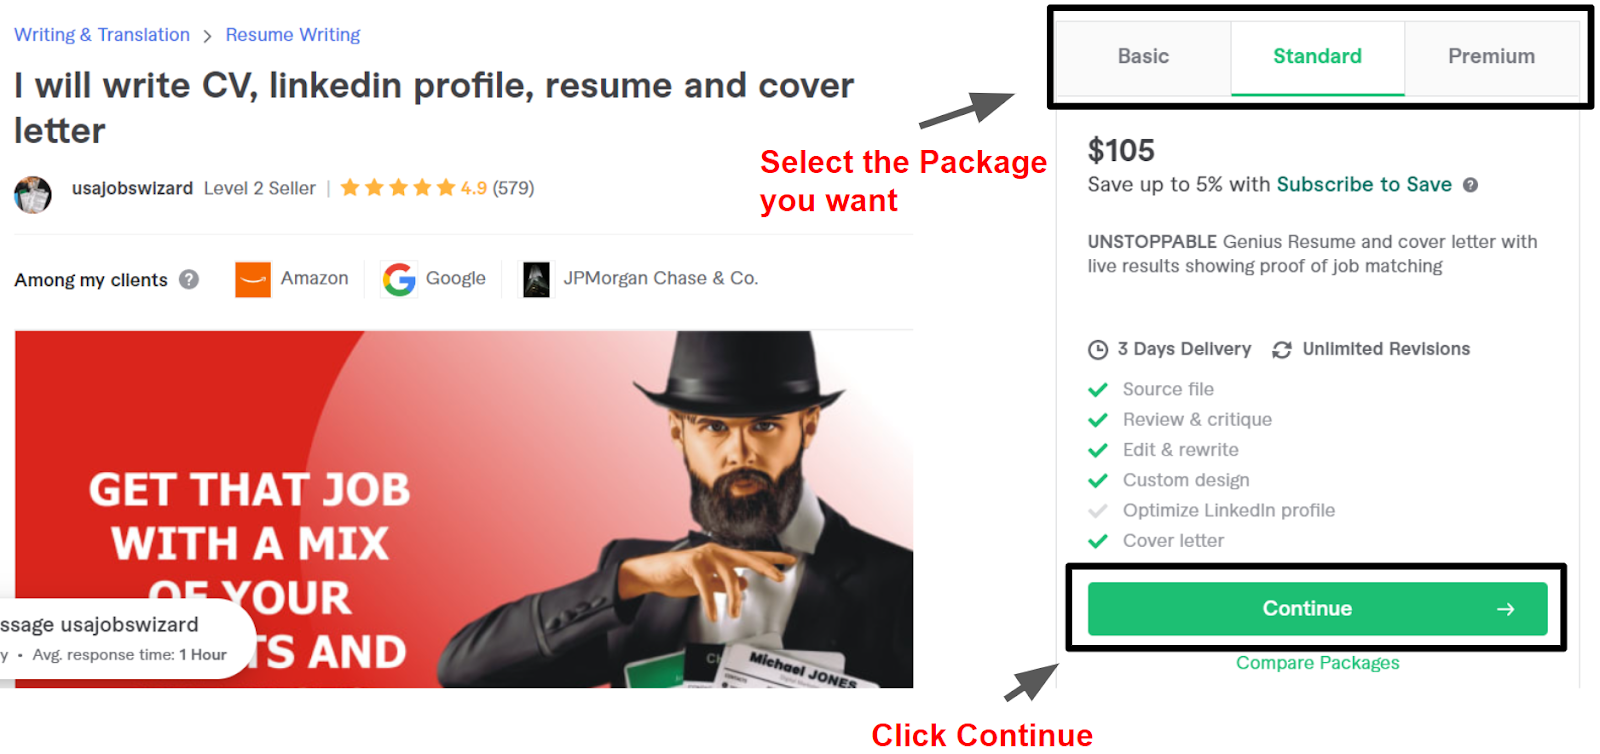 selecting a Package and continuing to checkout on Fiverr